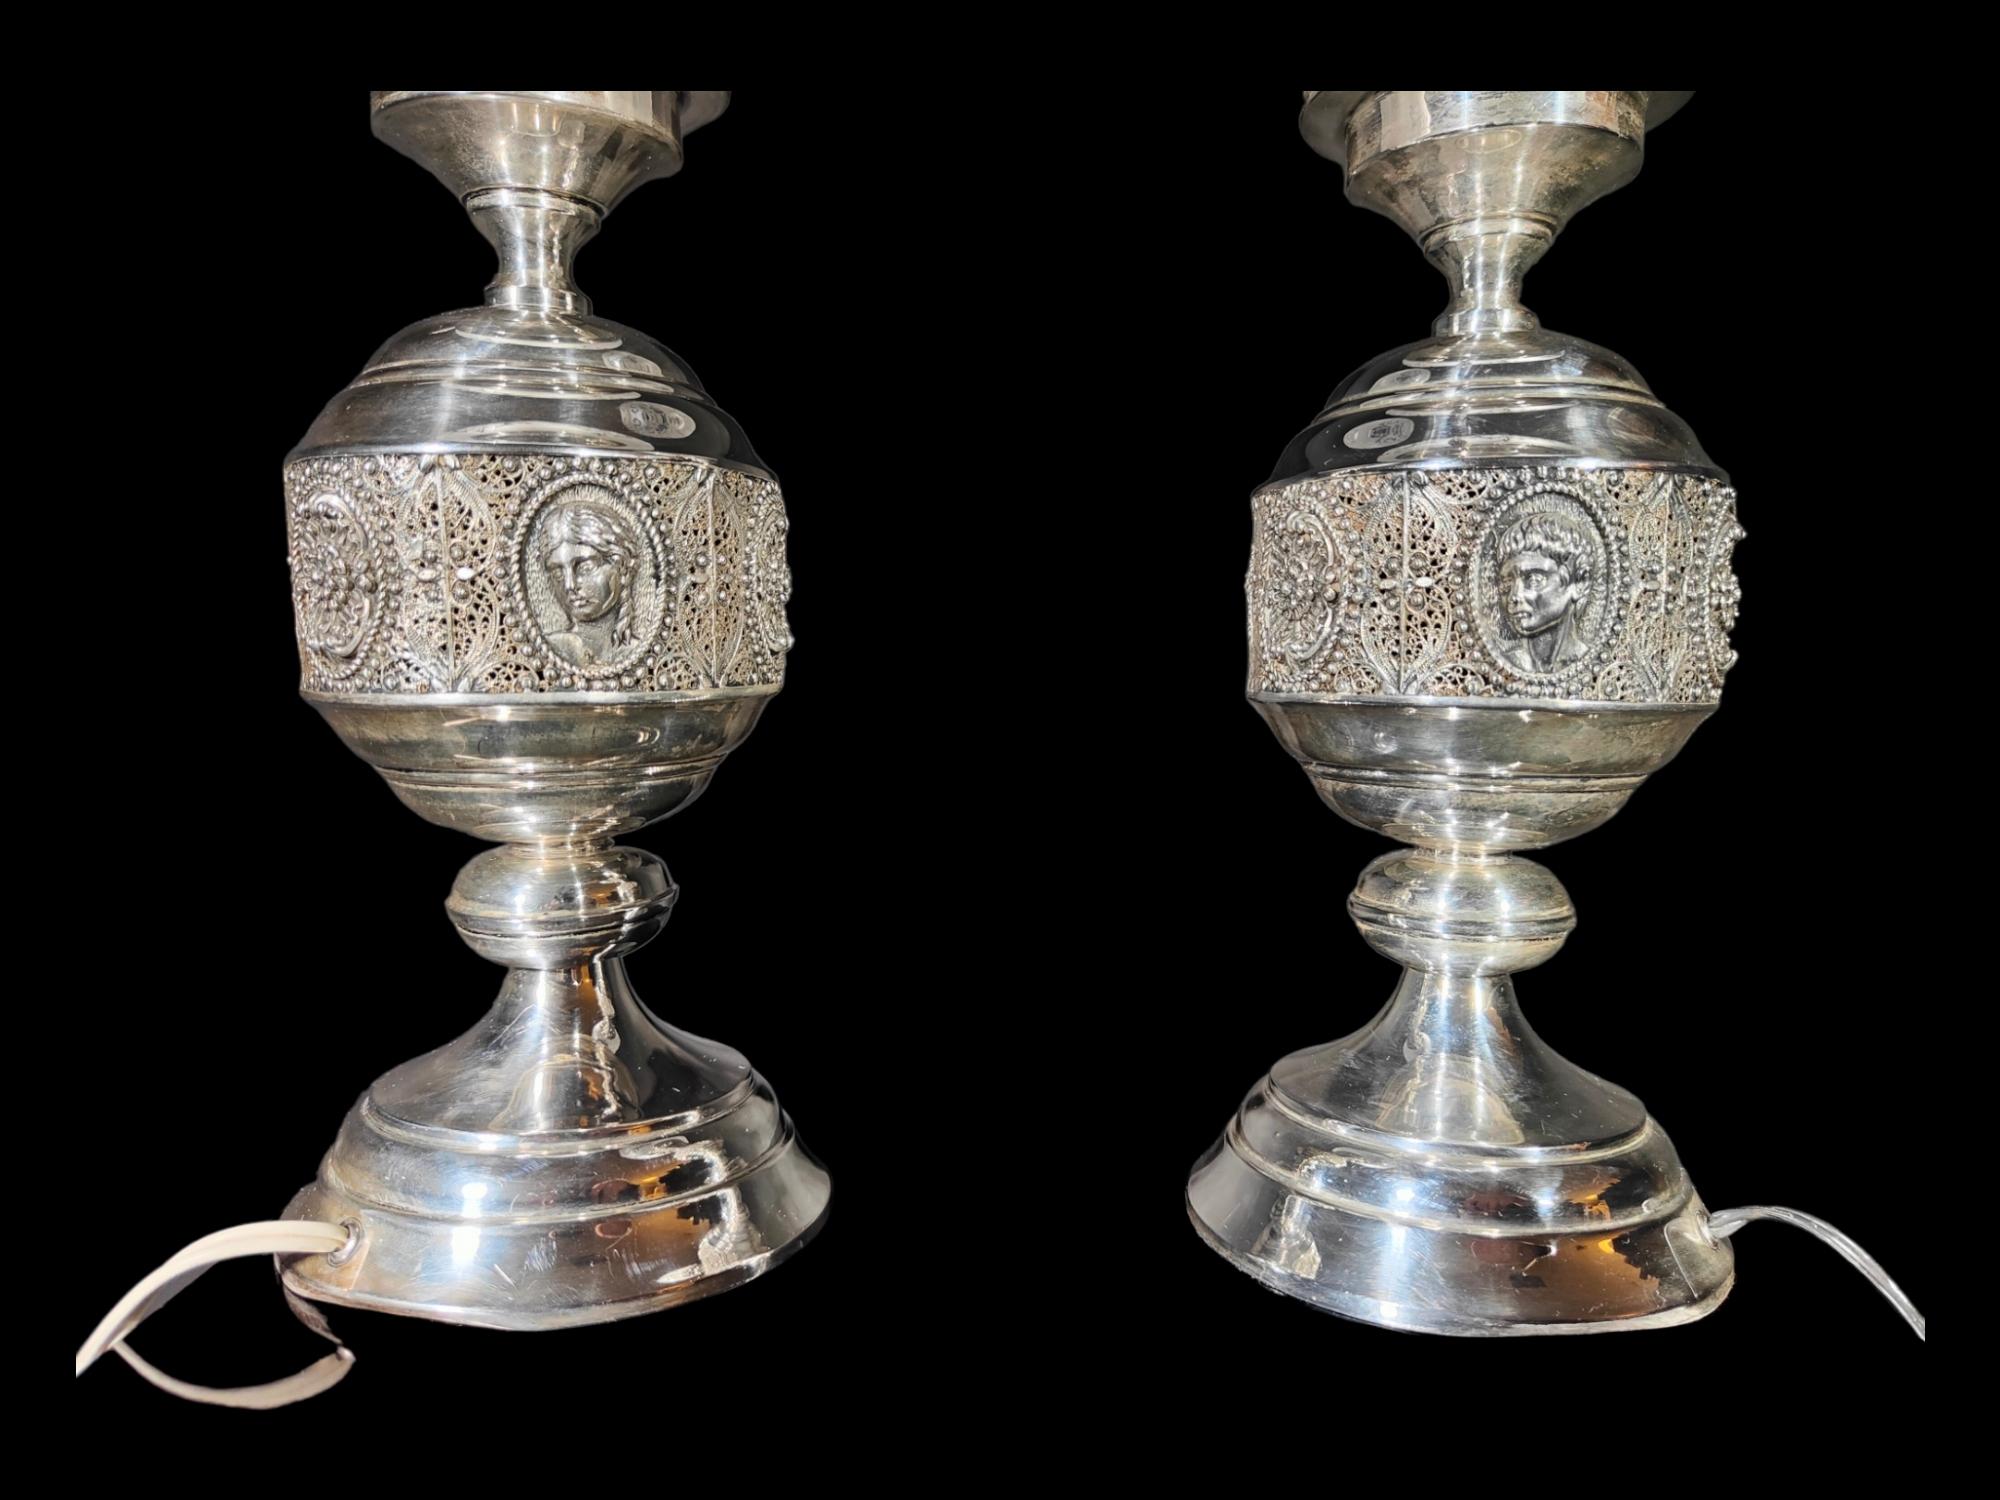 Pair of Lamps in Sterling Silver with Filigree For Sale 1